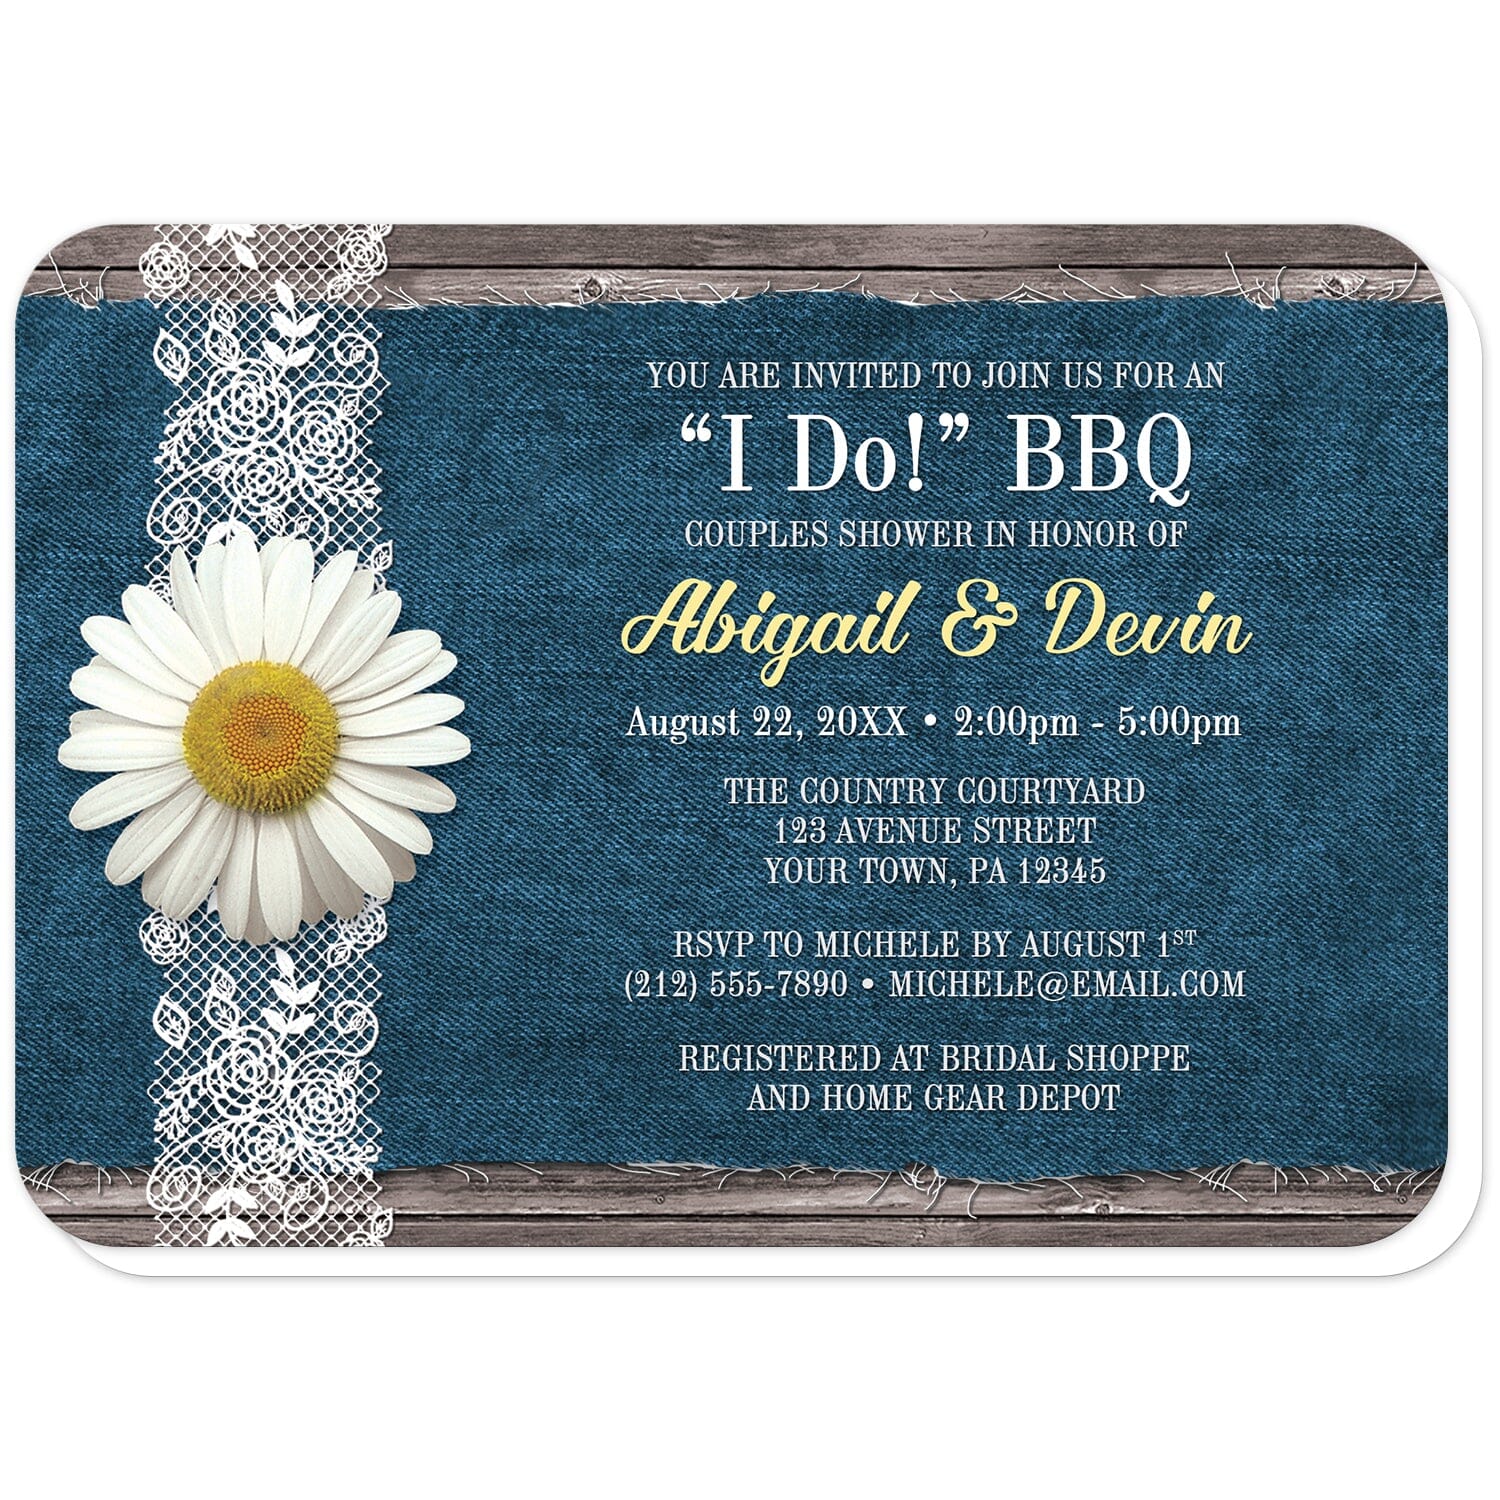 Daisy Denim and Lace I Do BBQ Couples Shower Invitations (with rounded corners) at Artistically Invited. Daisy denim and lace I Do BBQ couples shower invitations with a white daisy flower on a white lace ribbon along the left side. Your personalized couple shower celebration details are custom printed in white, light gray, and yellow over a fraying blue denim fabric background illustration over rustic wood.